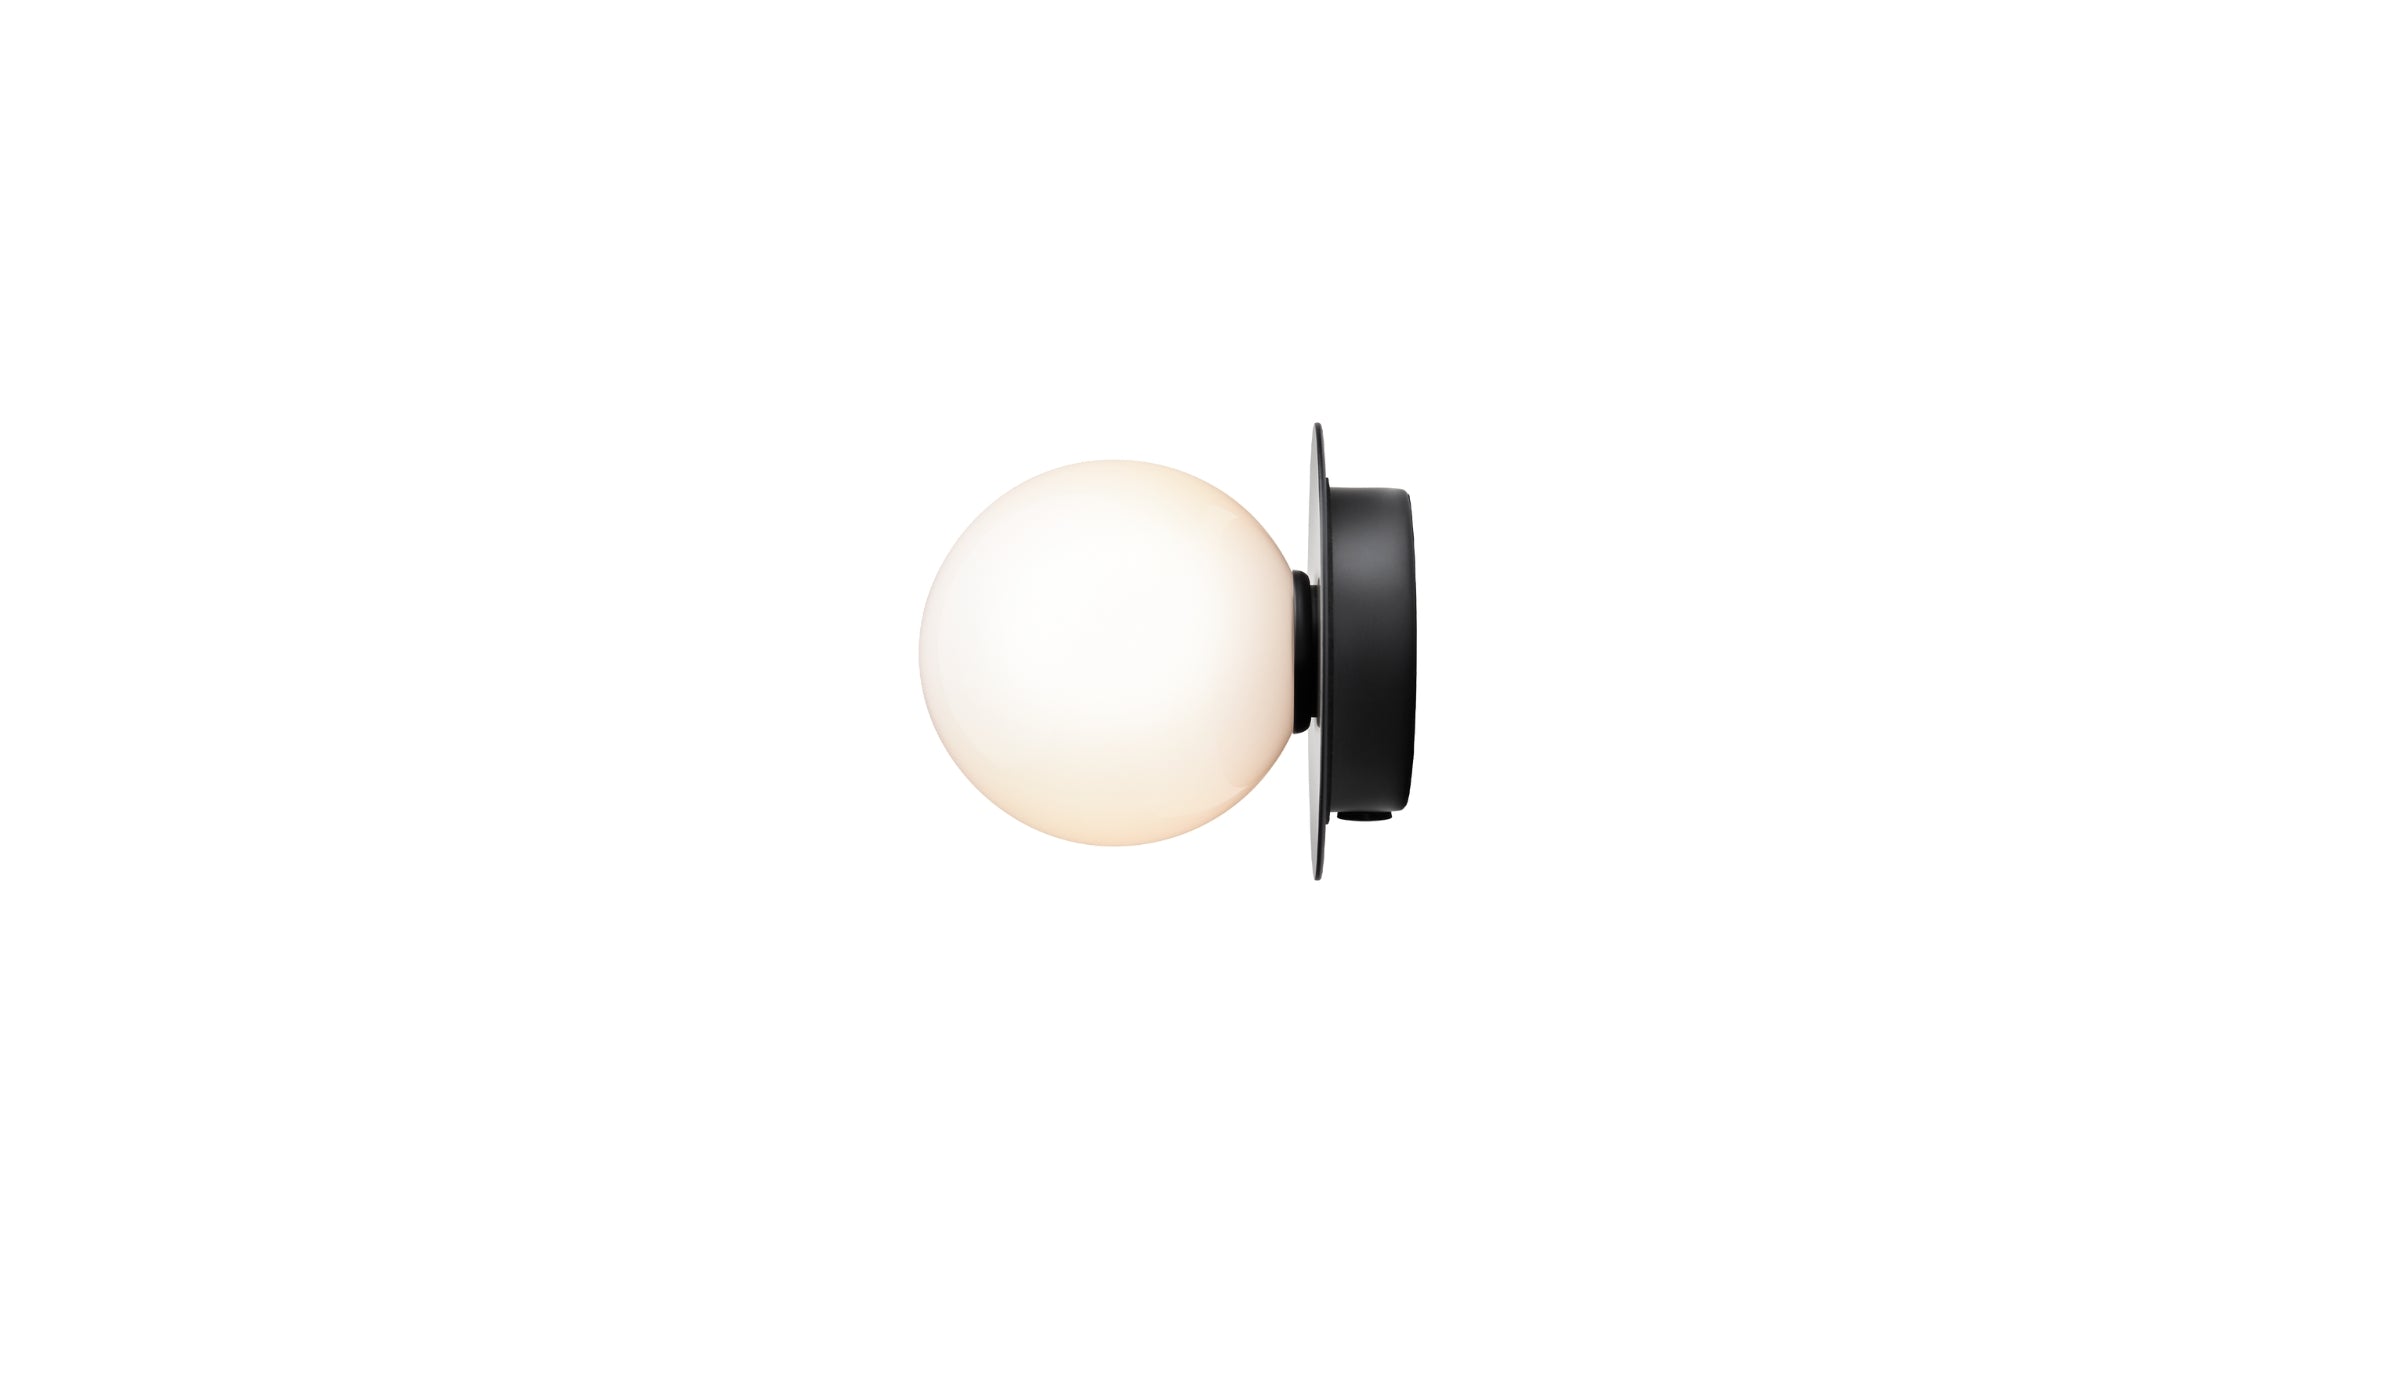 Liila 1 Small - Wall or ceiling light, opal glass lampshade, black